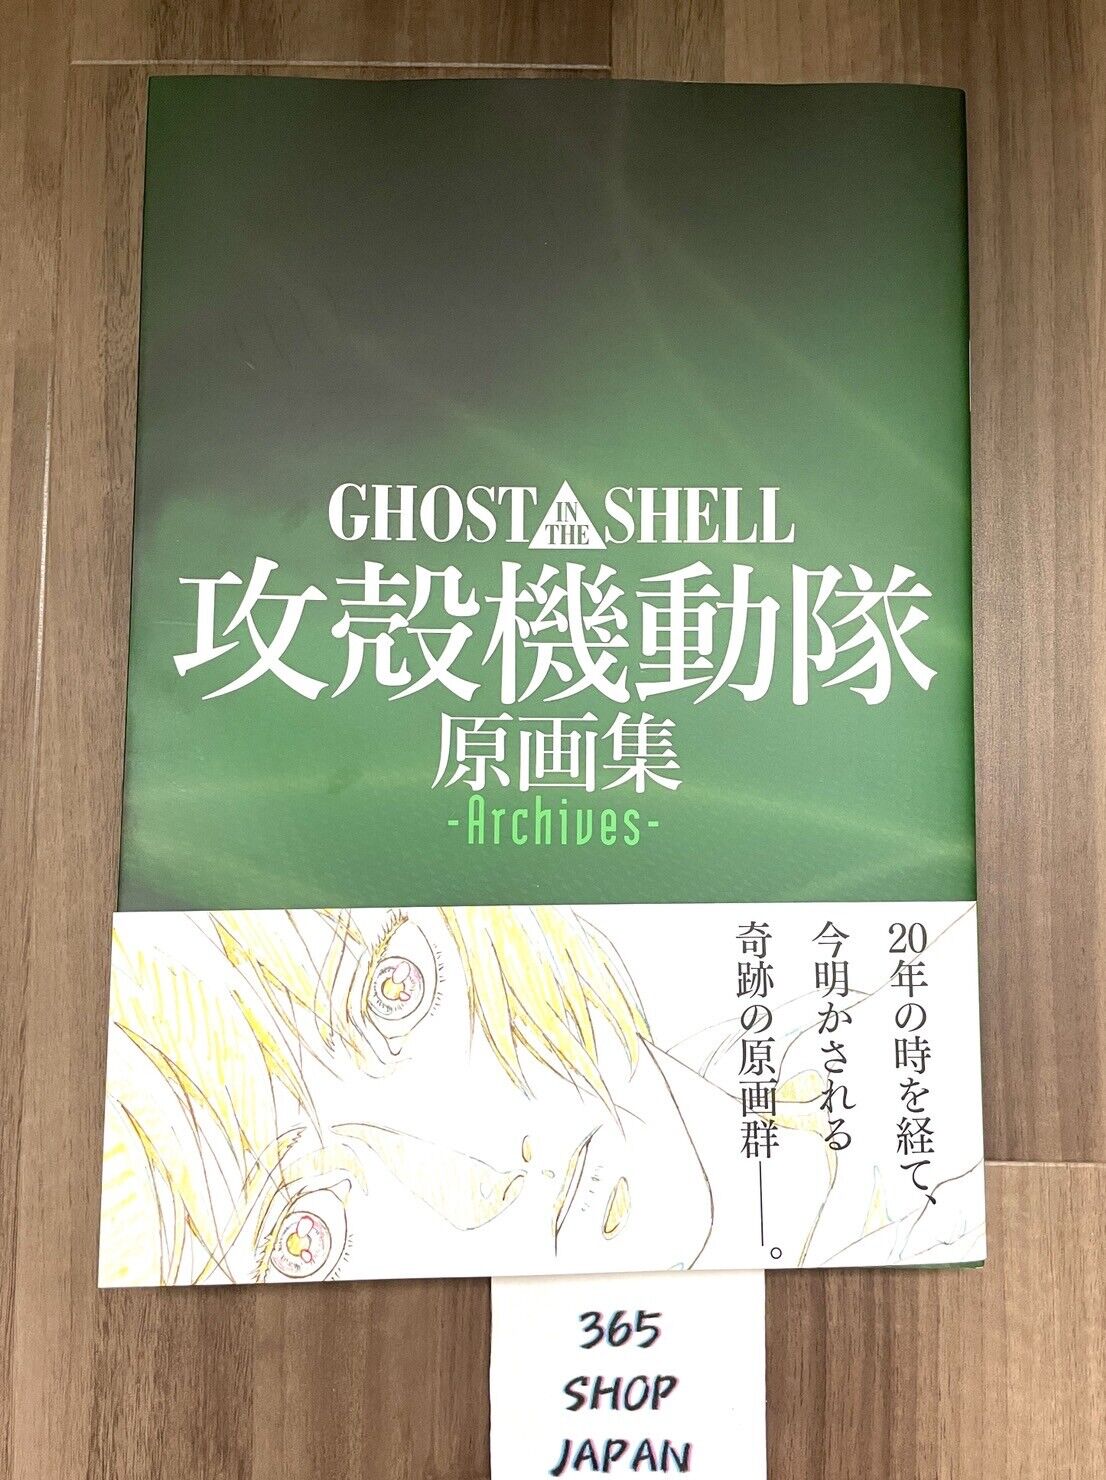 GHOST IN THE SHELL Archives Art Book Brand New Japan 